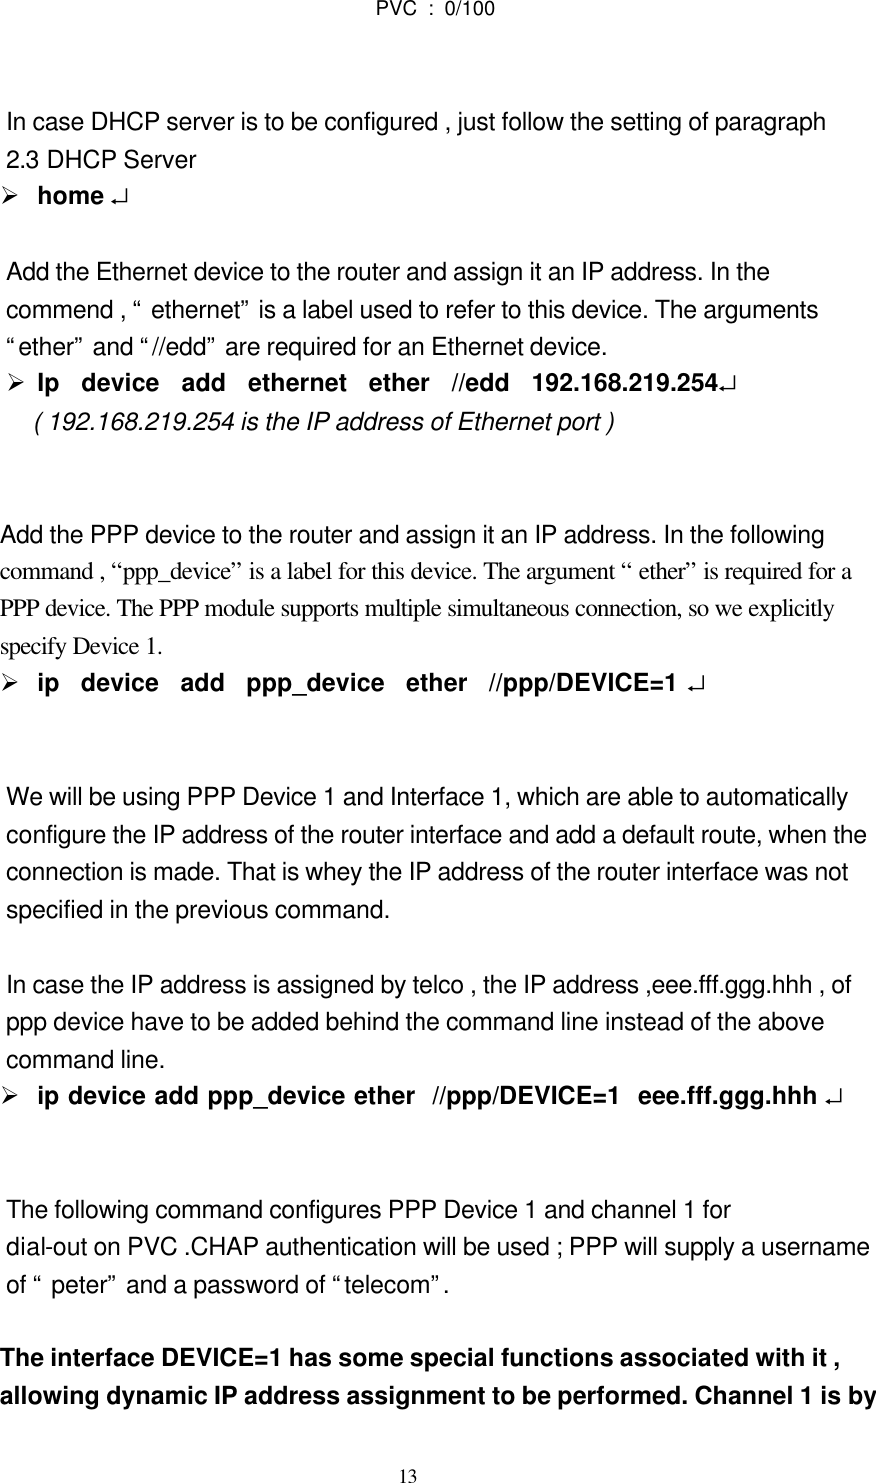  13                             PVC : 0/100                              In case DHCP server is to be configured , just follow the setting of paragraph 2.3 DHCP Server   Ø home ↵  Add the Ethernet device to the router and assign it an IP address. In the   commend , “ ethernet” is a label used to refer to this device. The arguments   “ether” and “//edd” are required for an Ethernet device. Ø Ip  device  add  ethernet  ether  //edd  192.168.219.254↵    ( 192.168.219.254 is the IP address of Ethernet port )      Add the PPP device to the router and assign it an IP address. In the following   command , “ppp_device” is a label for this device. The argument “ ether” is required for a   PPP device. The PPP module supports multiple simultaneous connection, so we explicitly   specify Device 1. Ø ip  device  add  ppp_device  ether  //ppp/DEVICE=1 ↵   We will be using PPP Device 1 and Interface 1, which are able to automatically   configure the IP address of the router interface and add a default route, when the   connection is made. That is whey the IP address of the router interface was not   specified in the previous command.  In case the IP address is assigned by telco , the IP address ,eee.fff.ggg.hhh , of   ppp device have to be added behind the command line instead of the above   command line. Ø ip device add ppp_device ether  //ppp/DEVICE=1  eee.fff.ggg.hhh ↵     The following command configures PPP Device 1 and channel 1 for   dial-out on PVC .CHAP authentication will be used ; PPP will supply a username   of “ peter” and a password of “telecom”.      The interface DEVICE=1 has some special functions associated with it ,   allowing dynamic IP address assignment to be performed. Channel 1 is by  